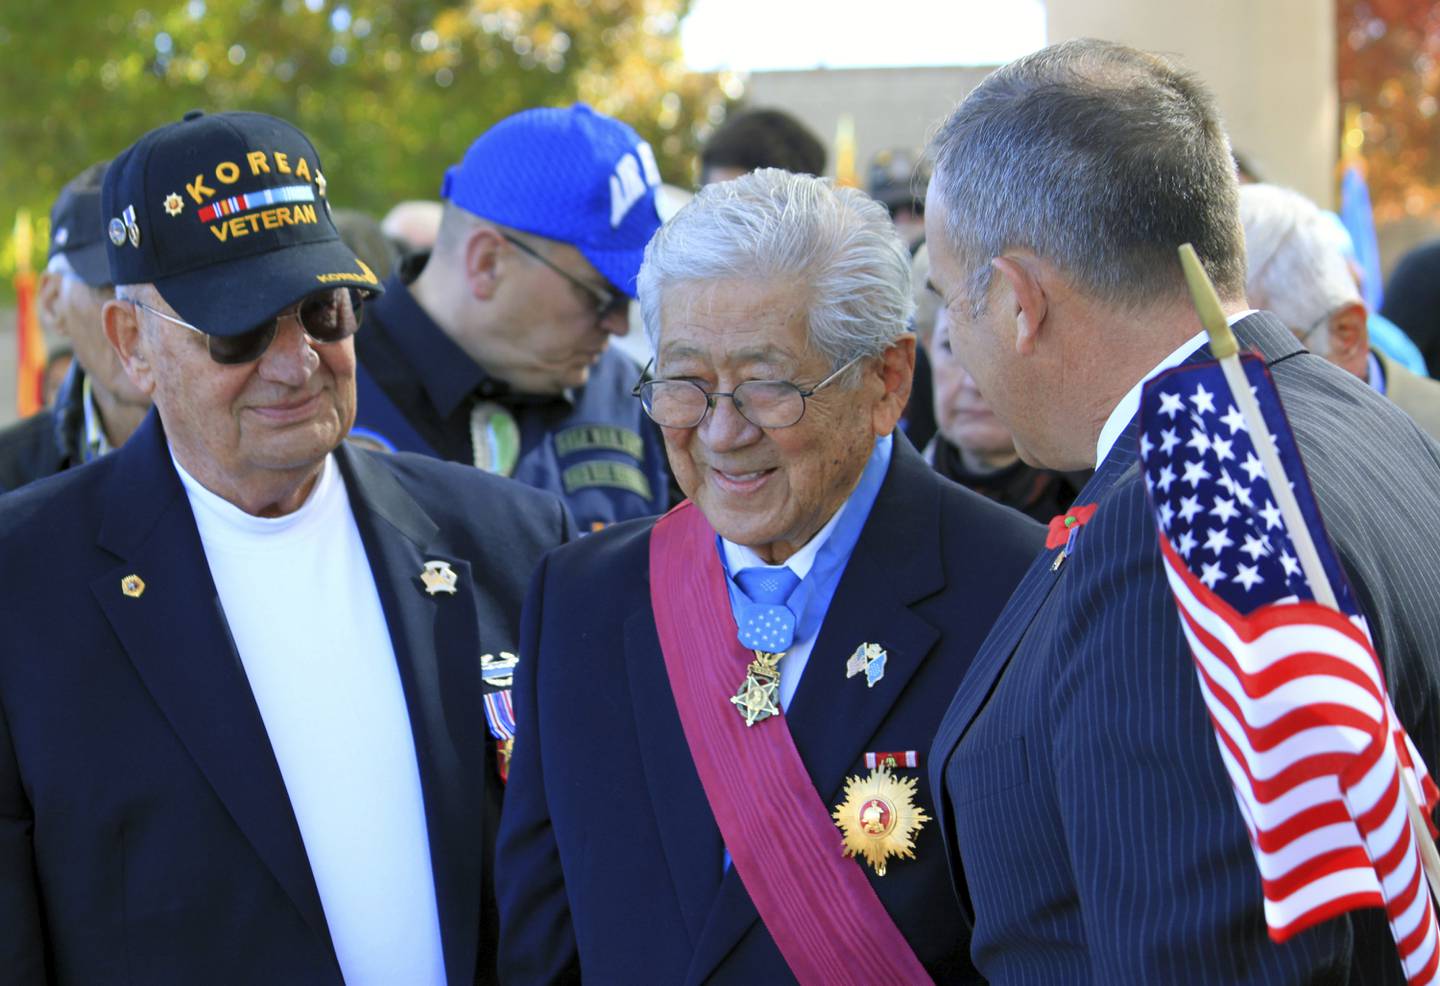 People stand to honor Medal of Honor recipient Hiroshi Miyamura, center, during a Veterans Day ceremony at the New Mexico Veterans Memorial in Albuquerque, N.M., on Nov. 11, 2014.